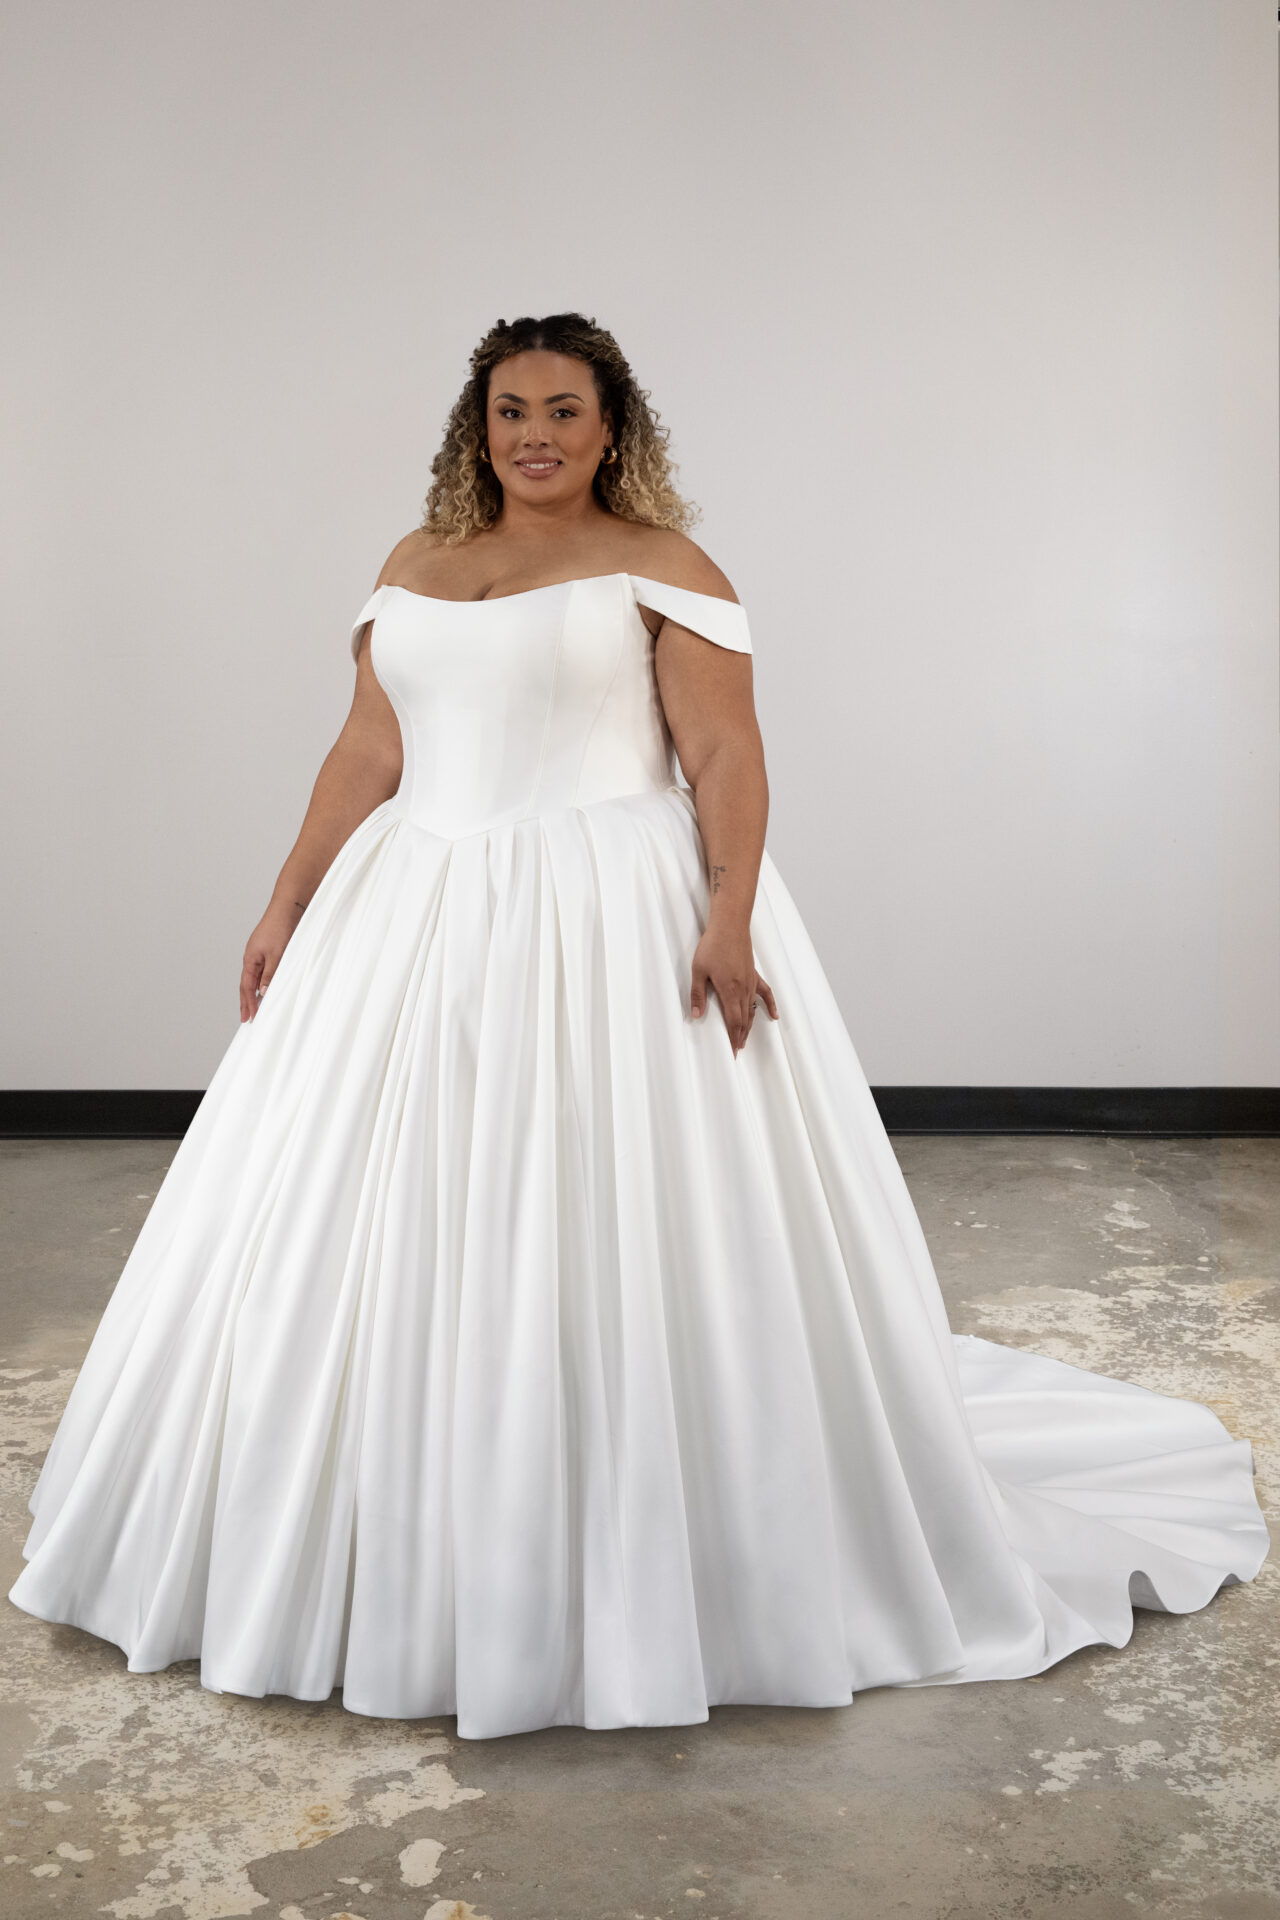 Classic Off-the-Shoulder Ball Gown With Buttons by Essense of Australia - Image 1